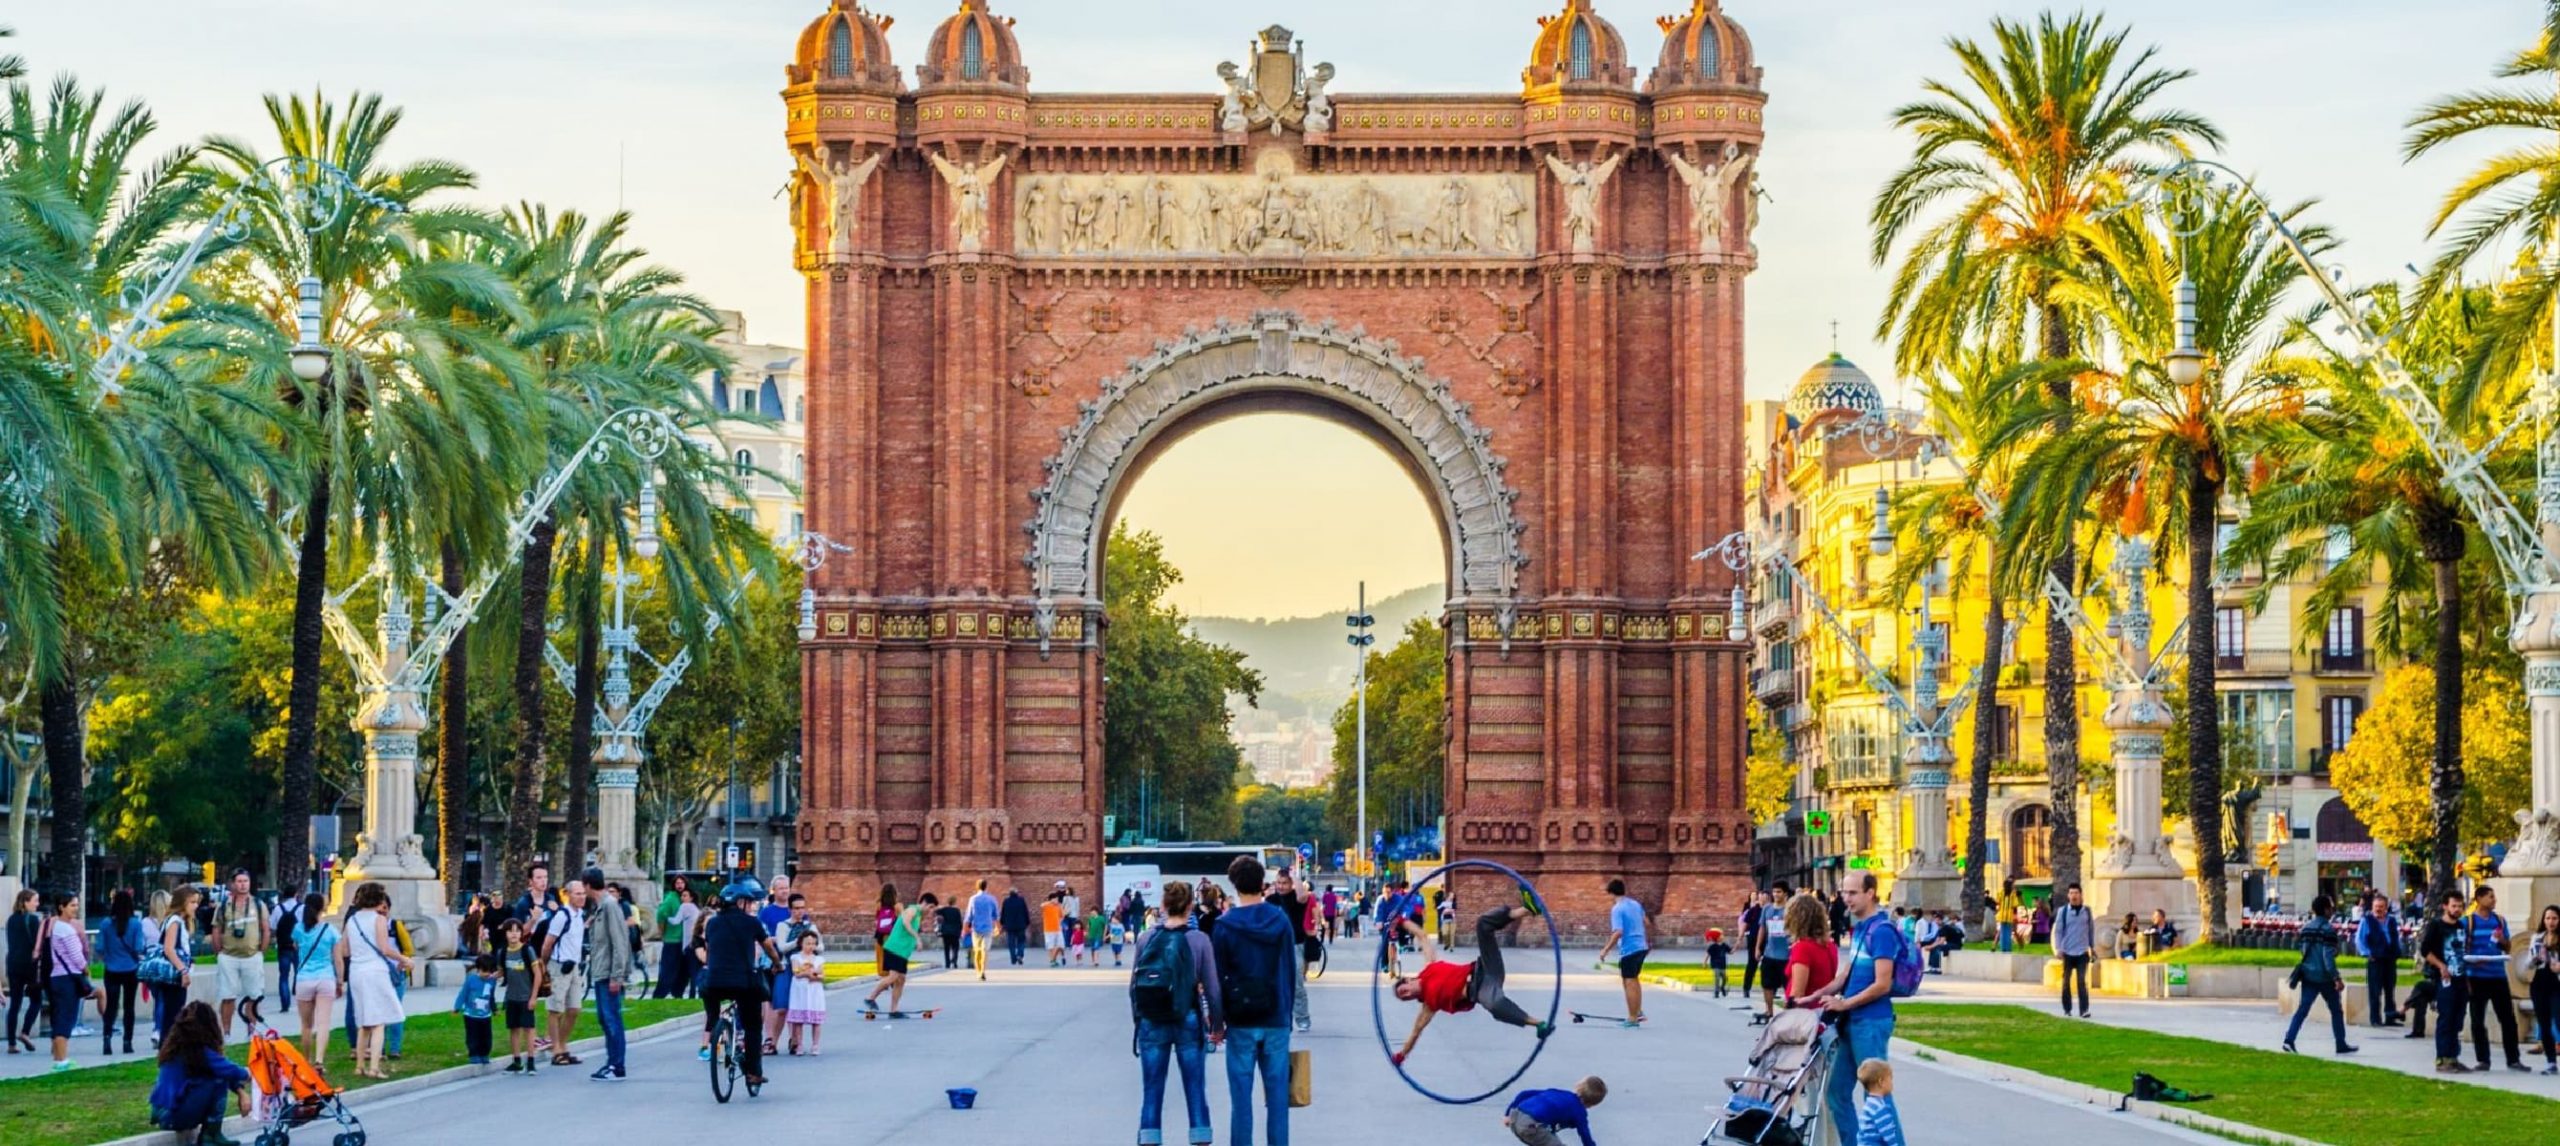 The 20 Most Amazing Barcelona Attractions